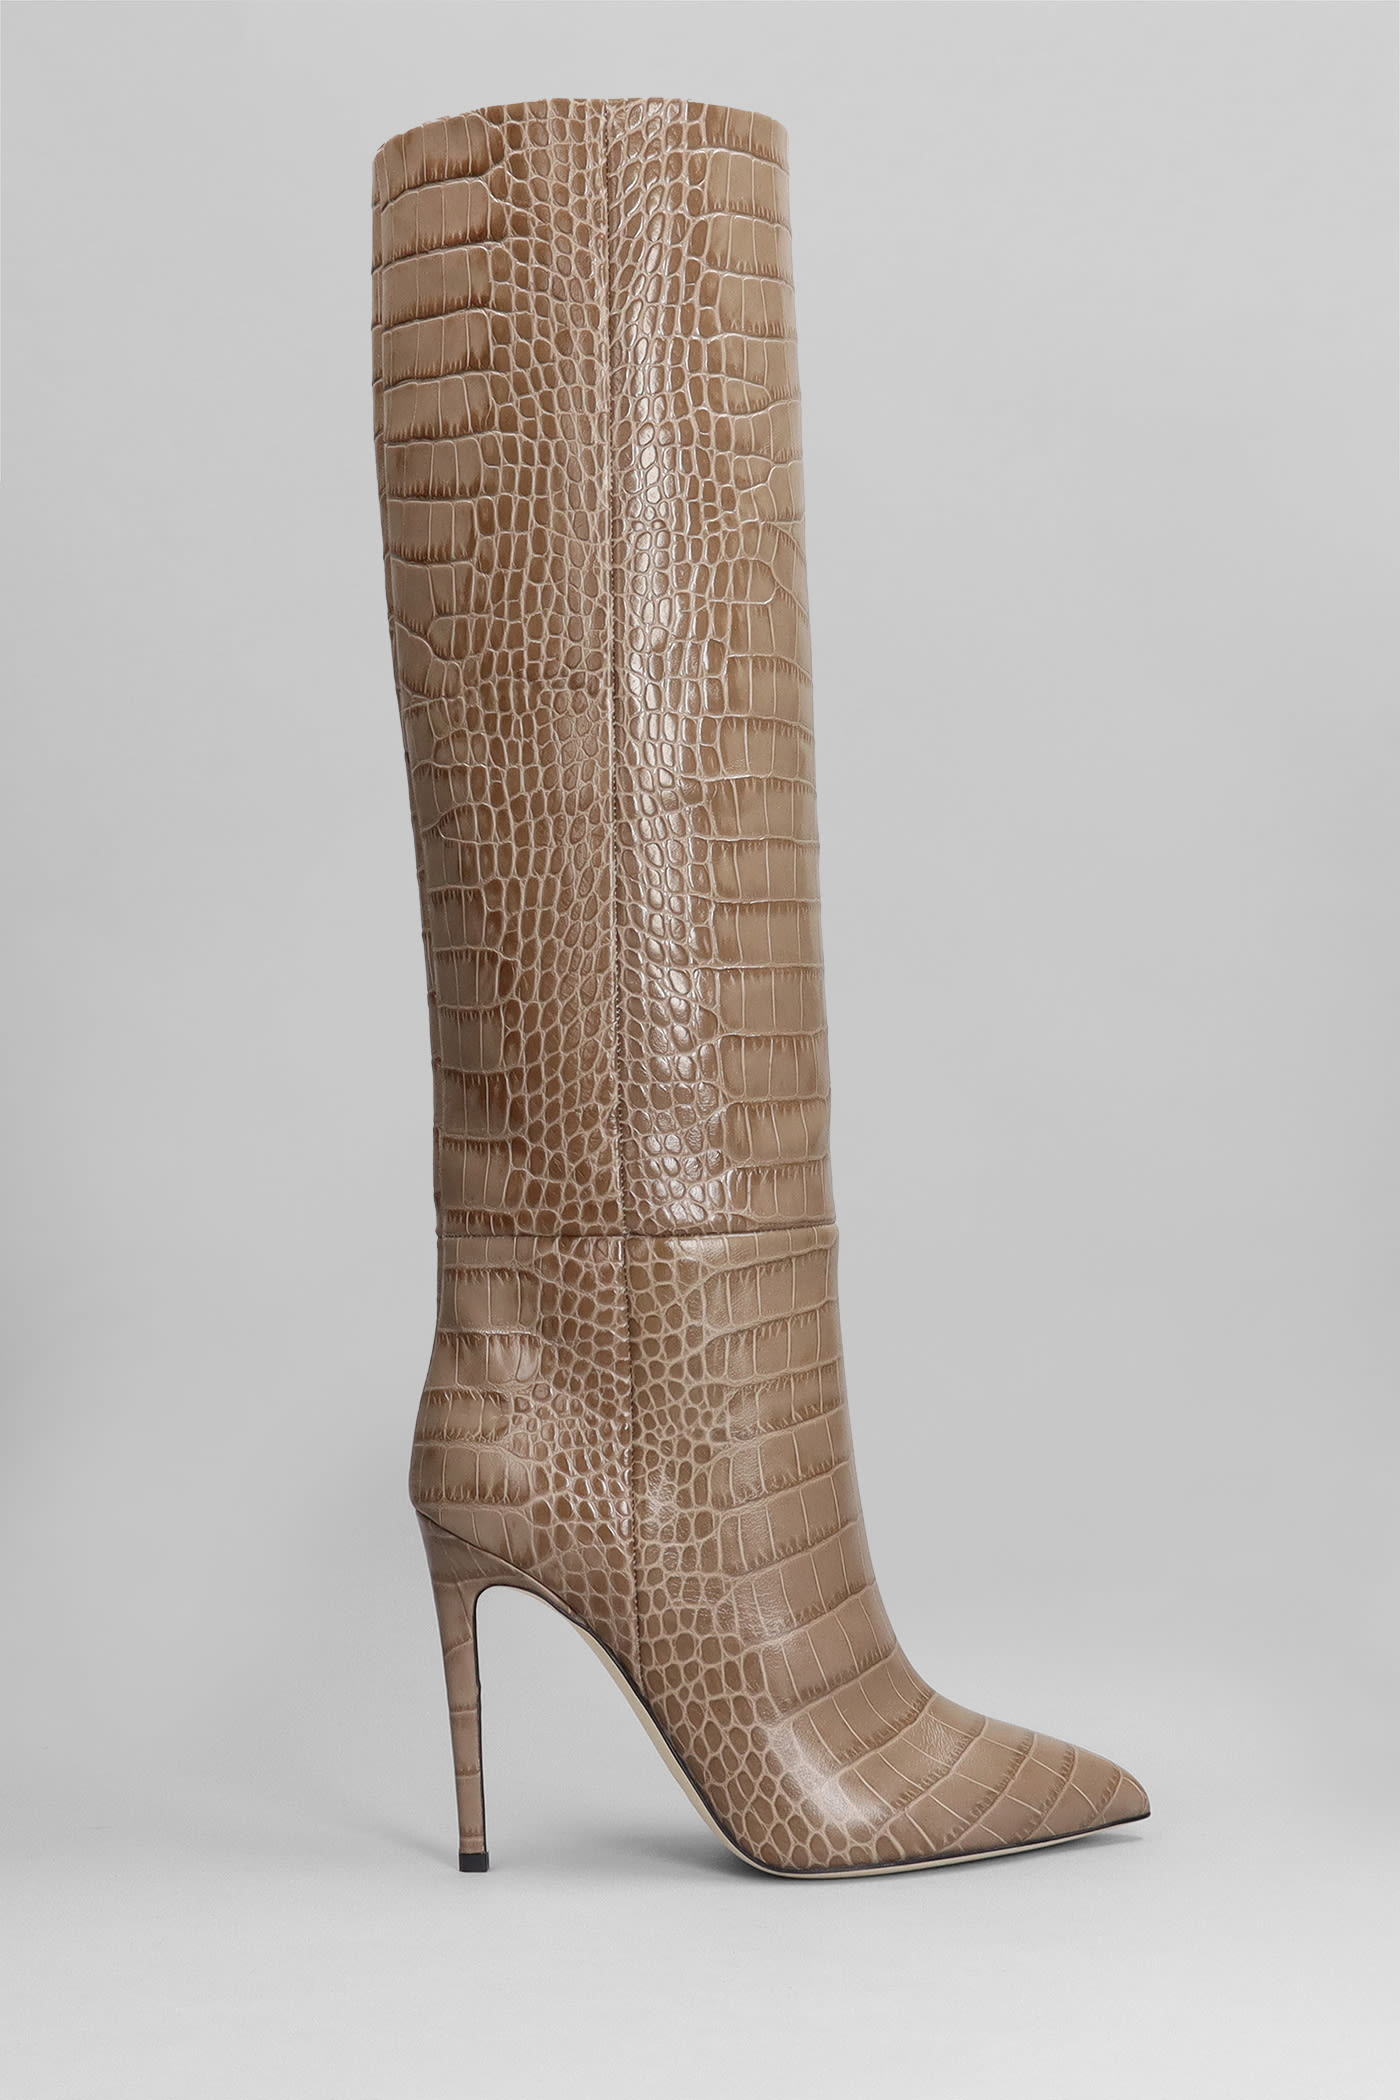 PARIS TEXAS HIGH HEELS BOOTS IN TAUPE LEATHER